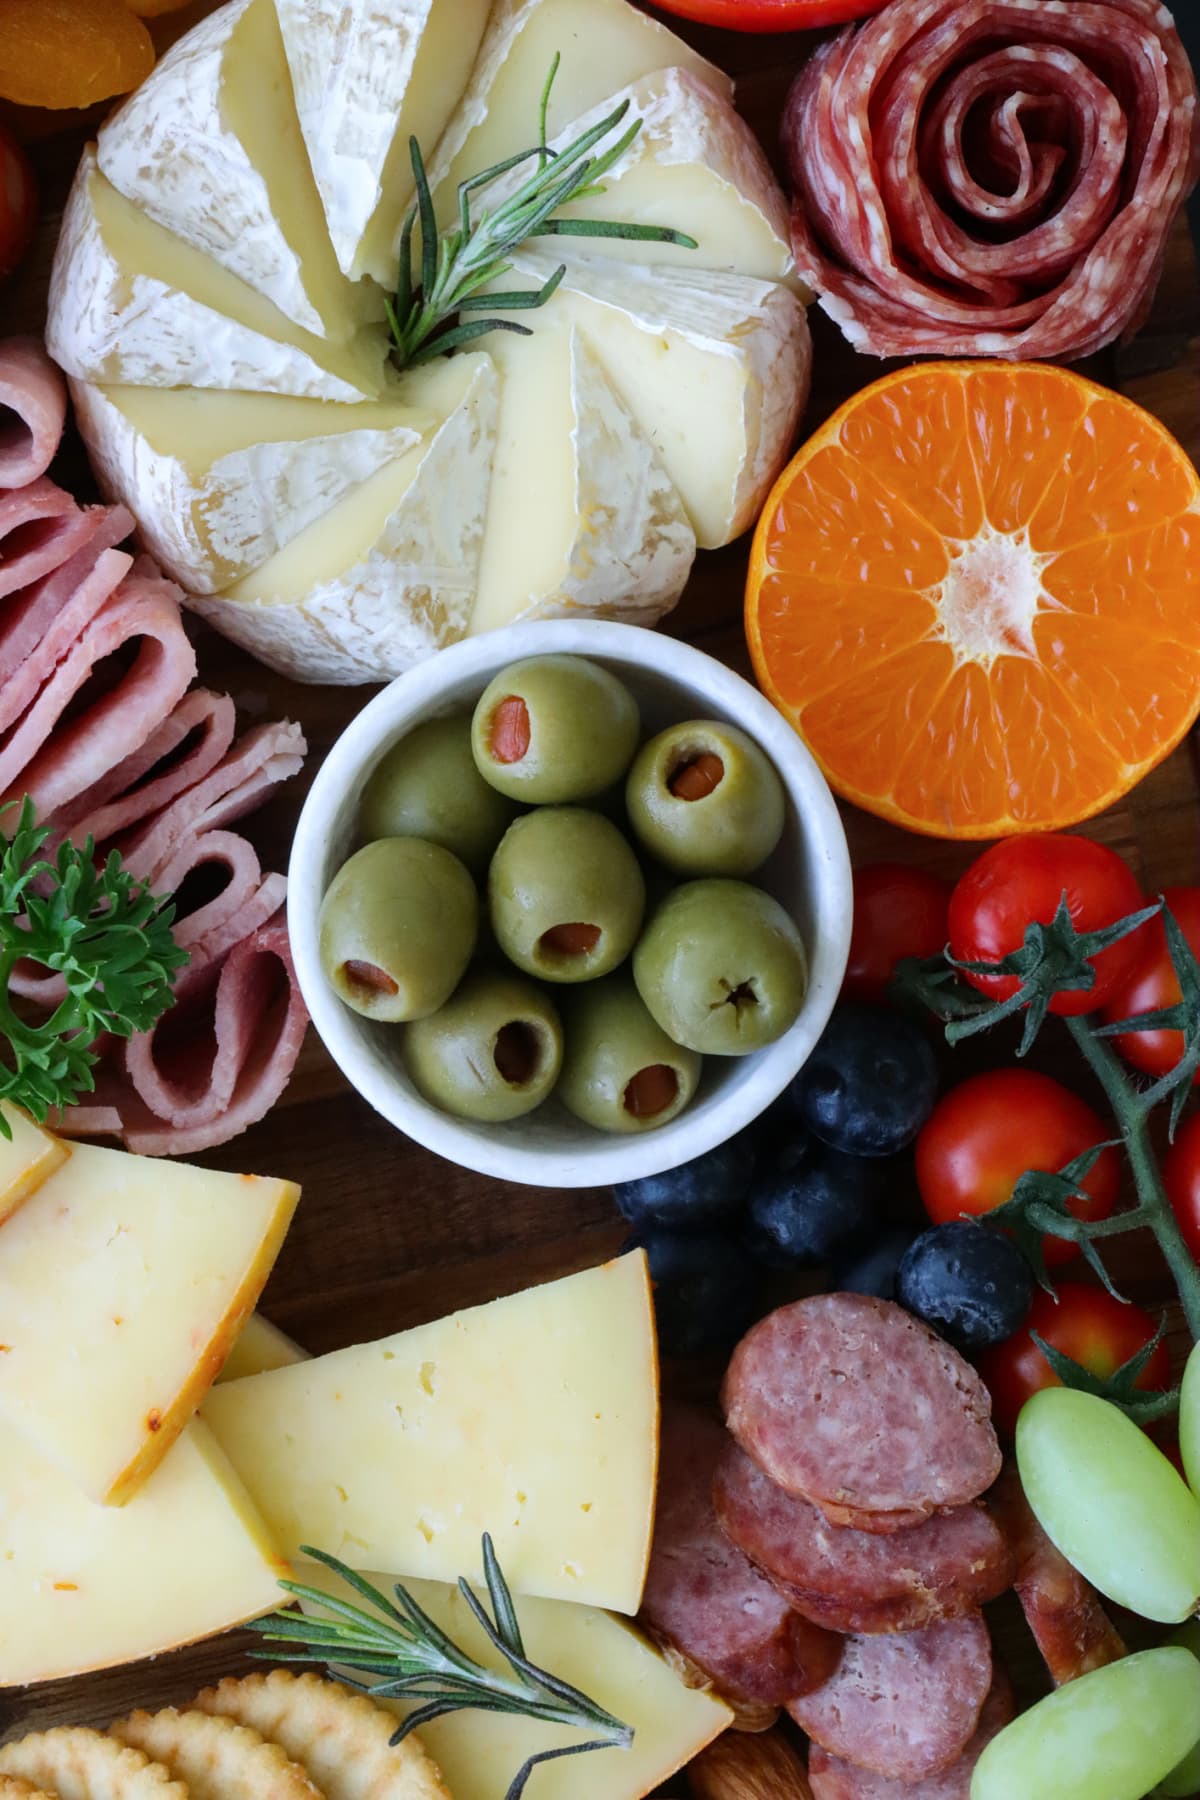 Stock photo showing close-up, elevated view of wooden charcuterie board covered with prepared sliced and chopped ingredients including crackers, ramekin of stuffed olives, salami roses, cherry vine tomatoes, Cheddar cheese, blueberries, orange half, Brie, Parsley and Rosemary herb garnish.